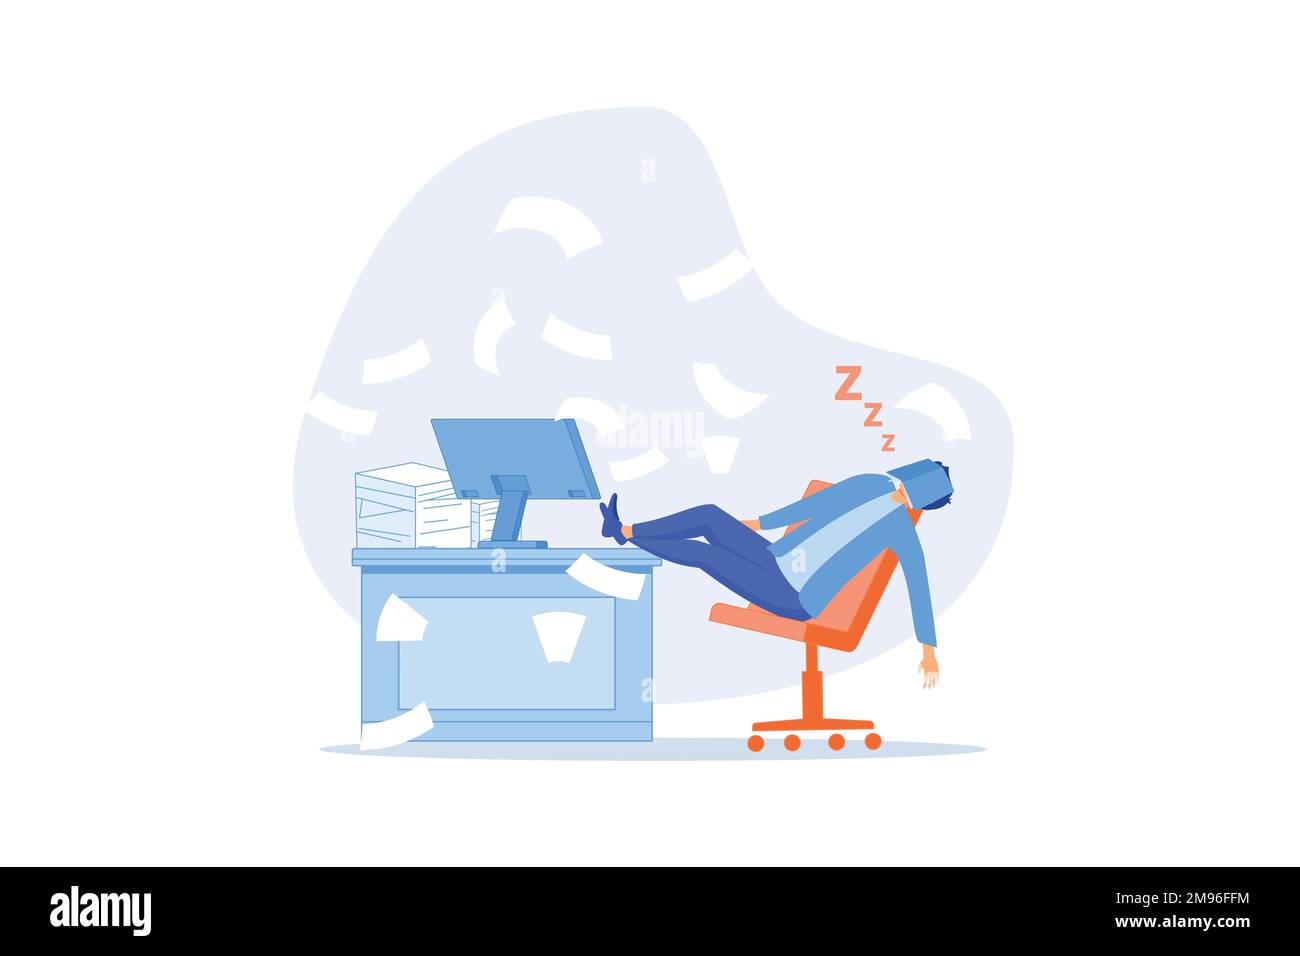 Quiet quitting, lack of work motivation, work boredom or morality, exhaustion or burn out from hard work without recognition concept, flat vector mode Stock Vector